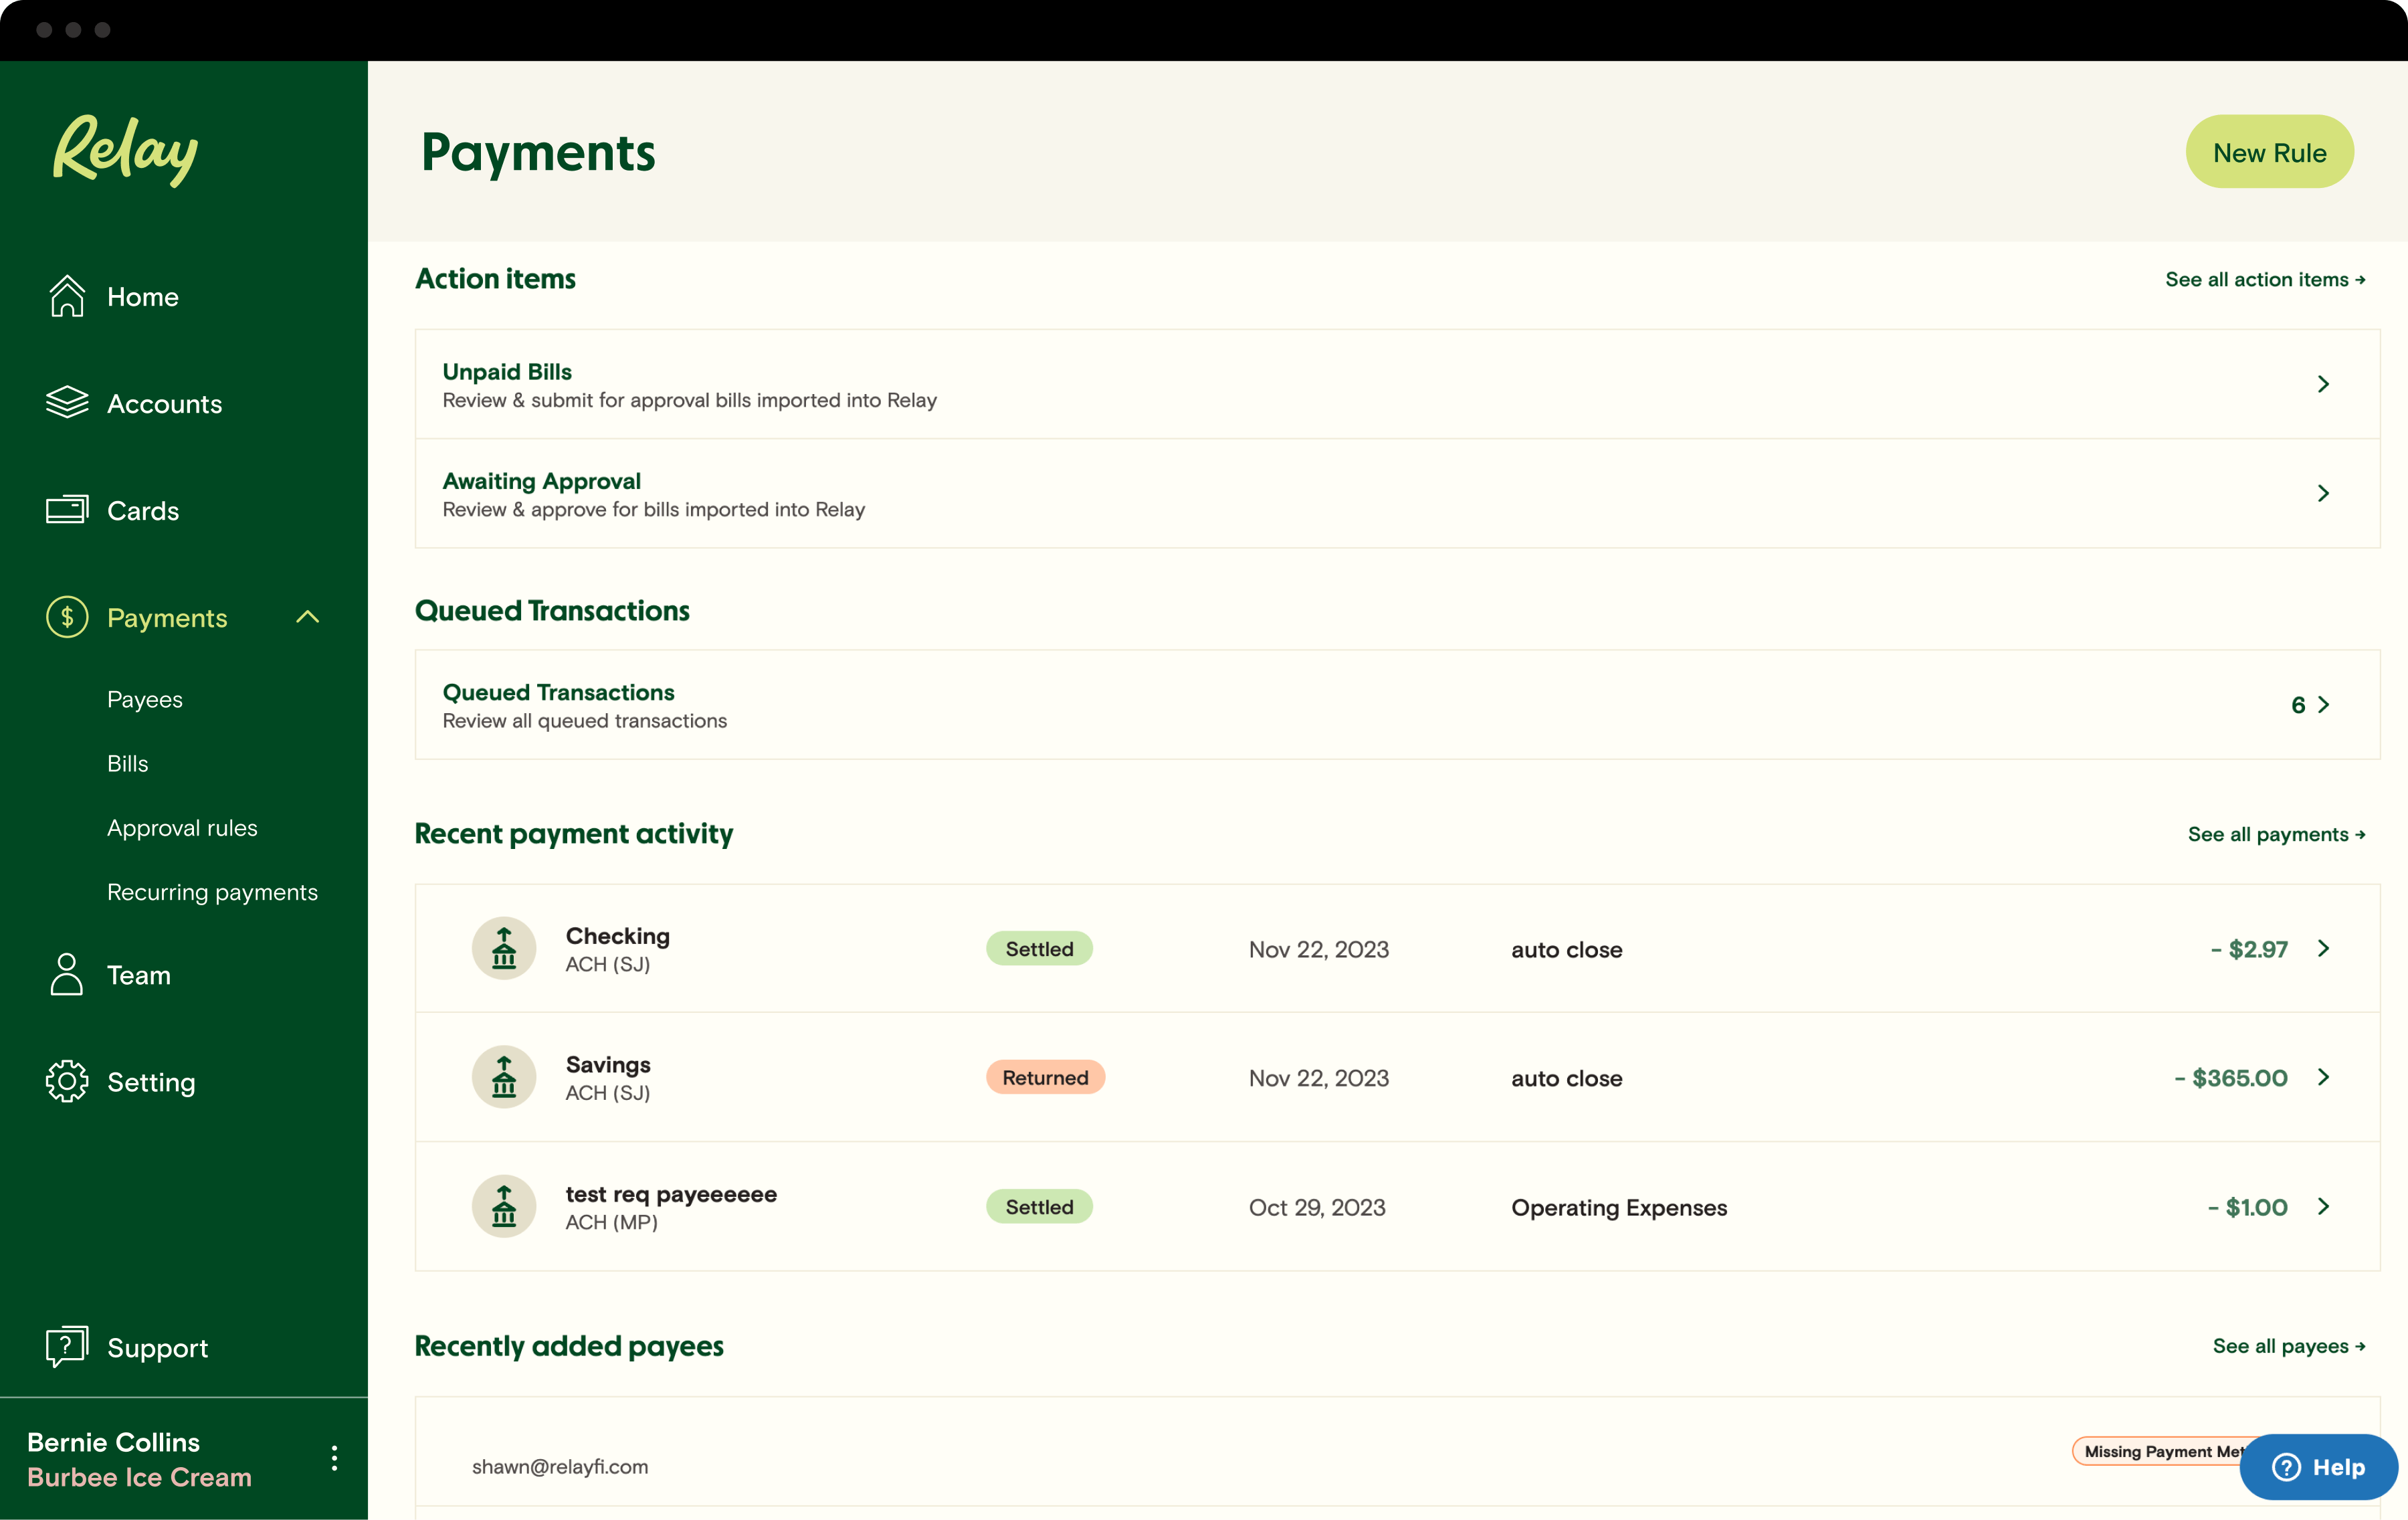 Payments section in Relay with list of recent payment activity